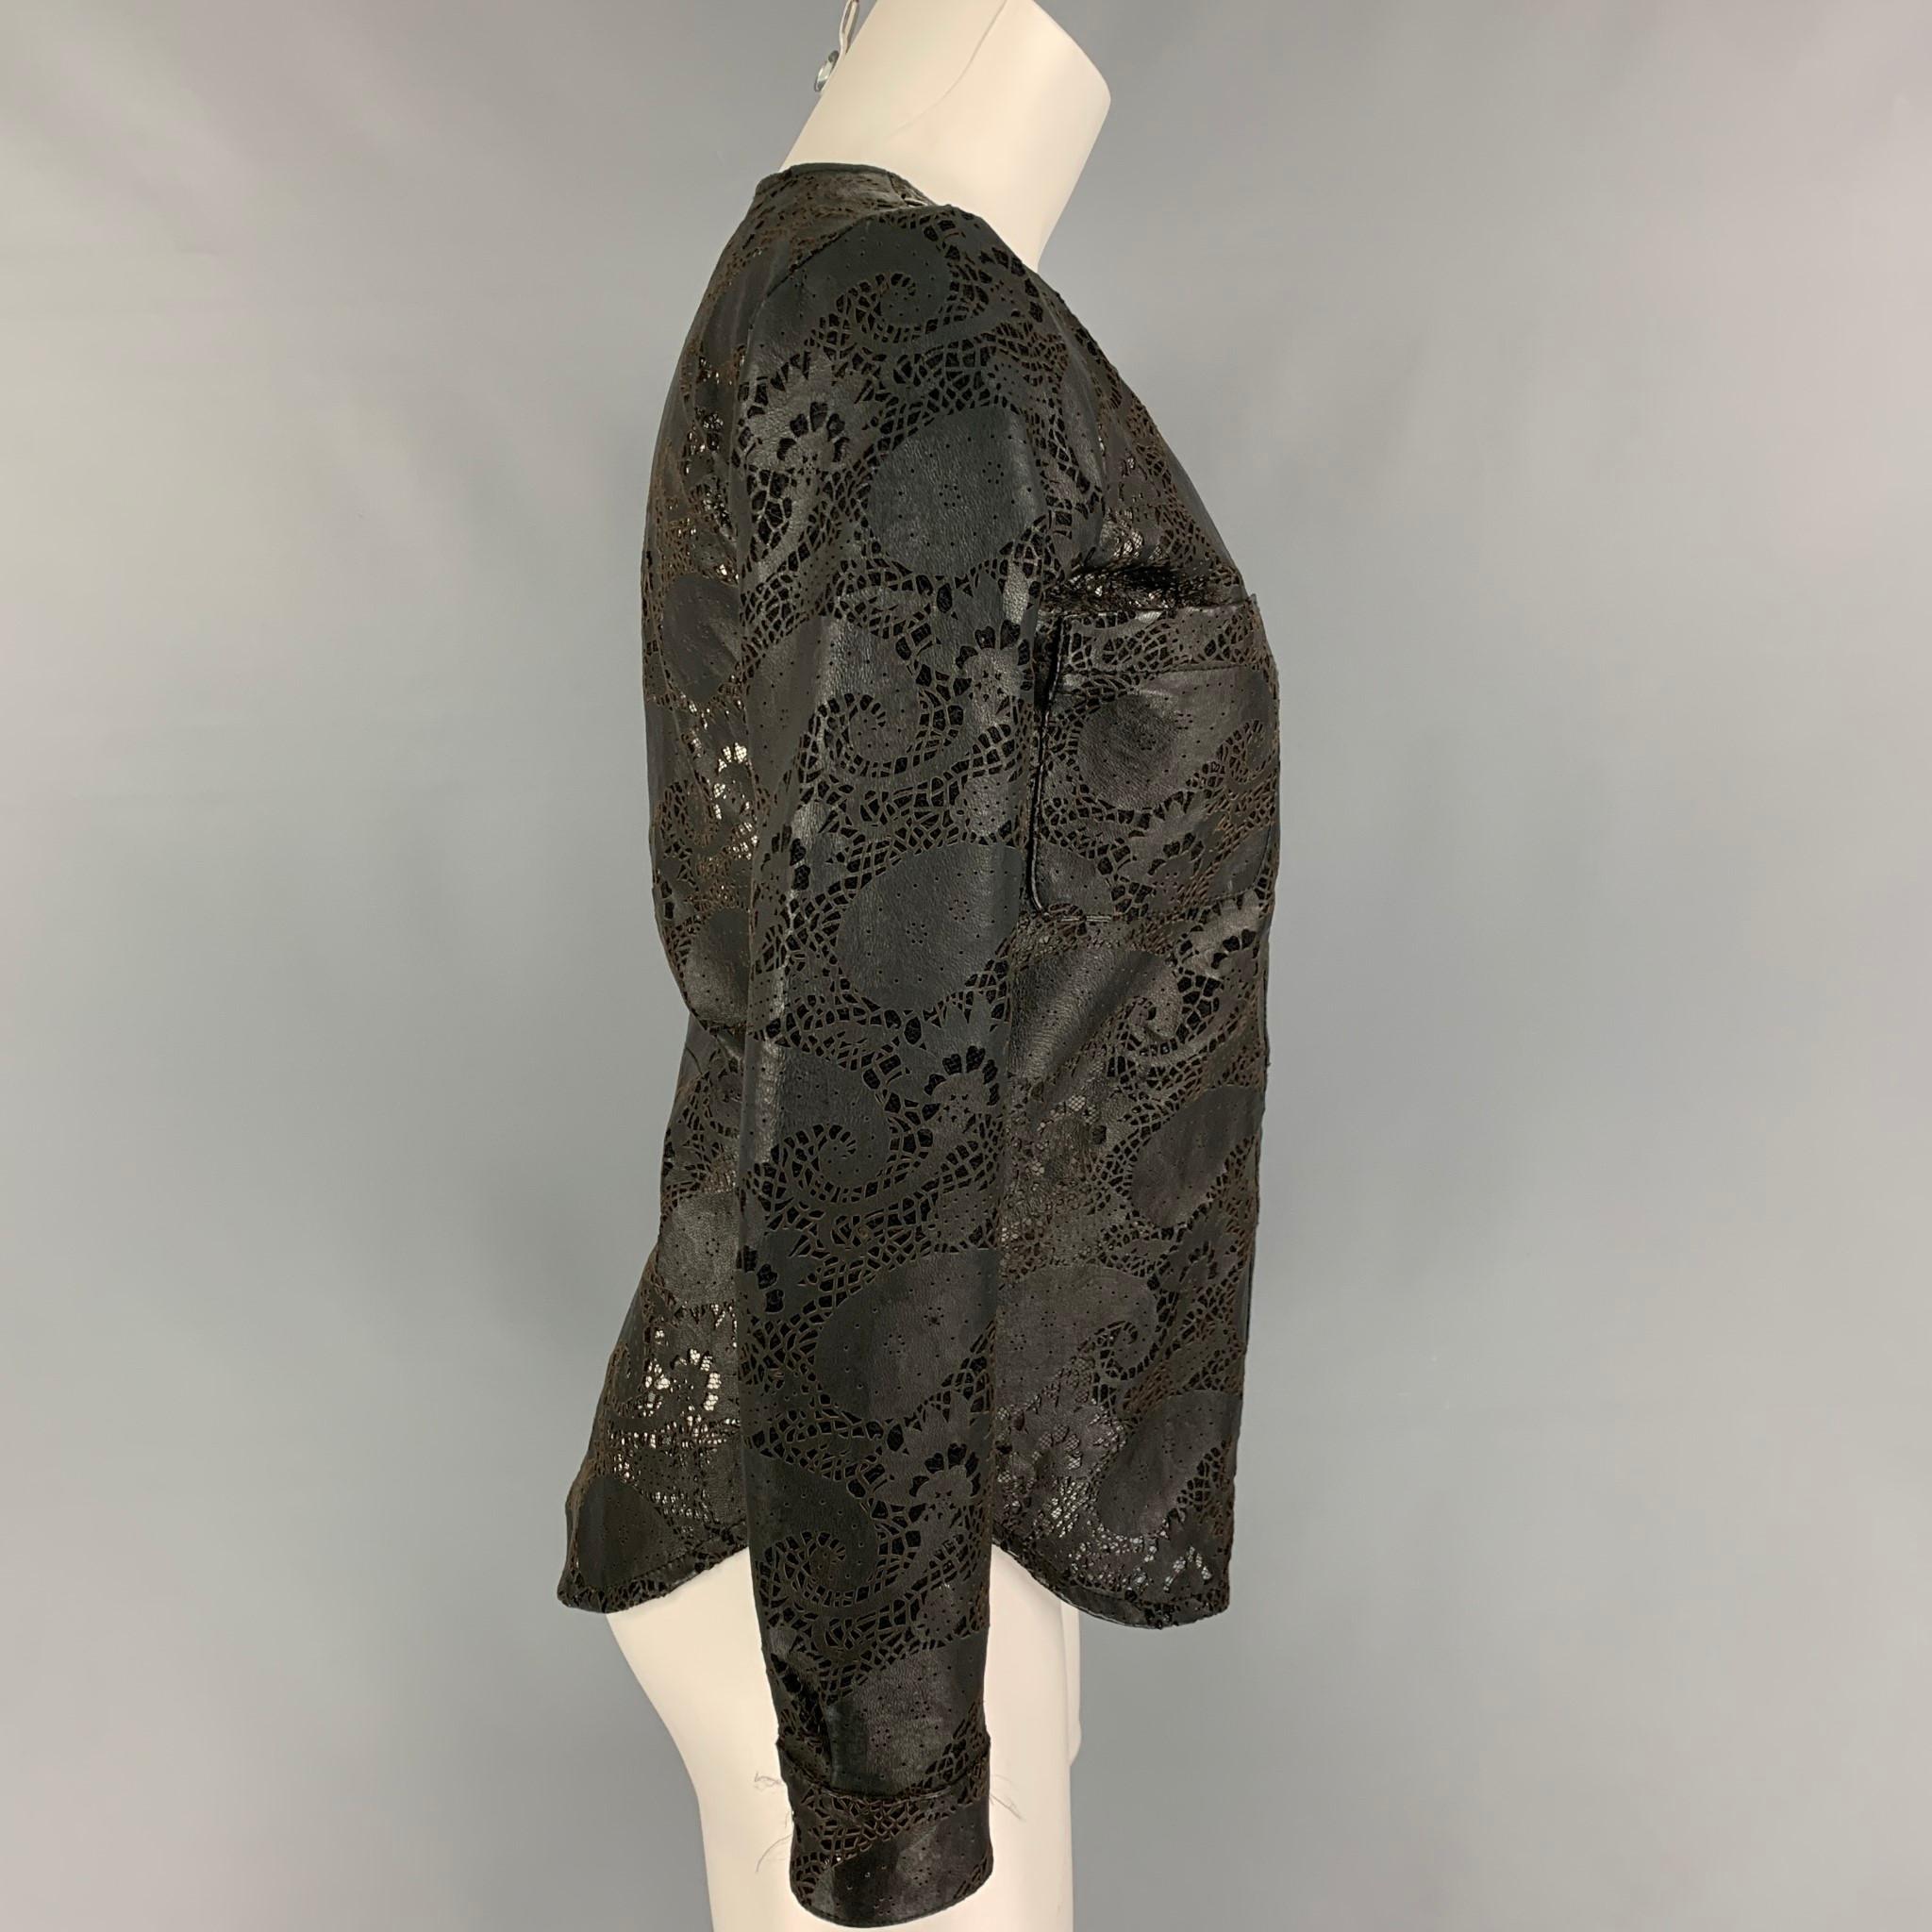 GIORGIO BRATO jacket comes in a black lace perforated leather featuring a collarless style, front pockets, and a zip up closure. 

Very Good Pre-Owned Condition.
Marked: 40

Measurements:

Shoulder: 14 in.
Bust: 34 in.
Sleeve: 23 in.
Length: 23.5